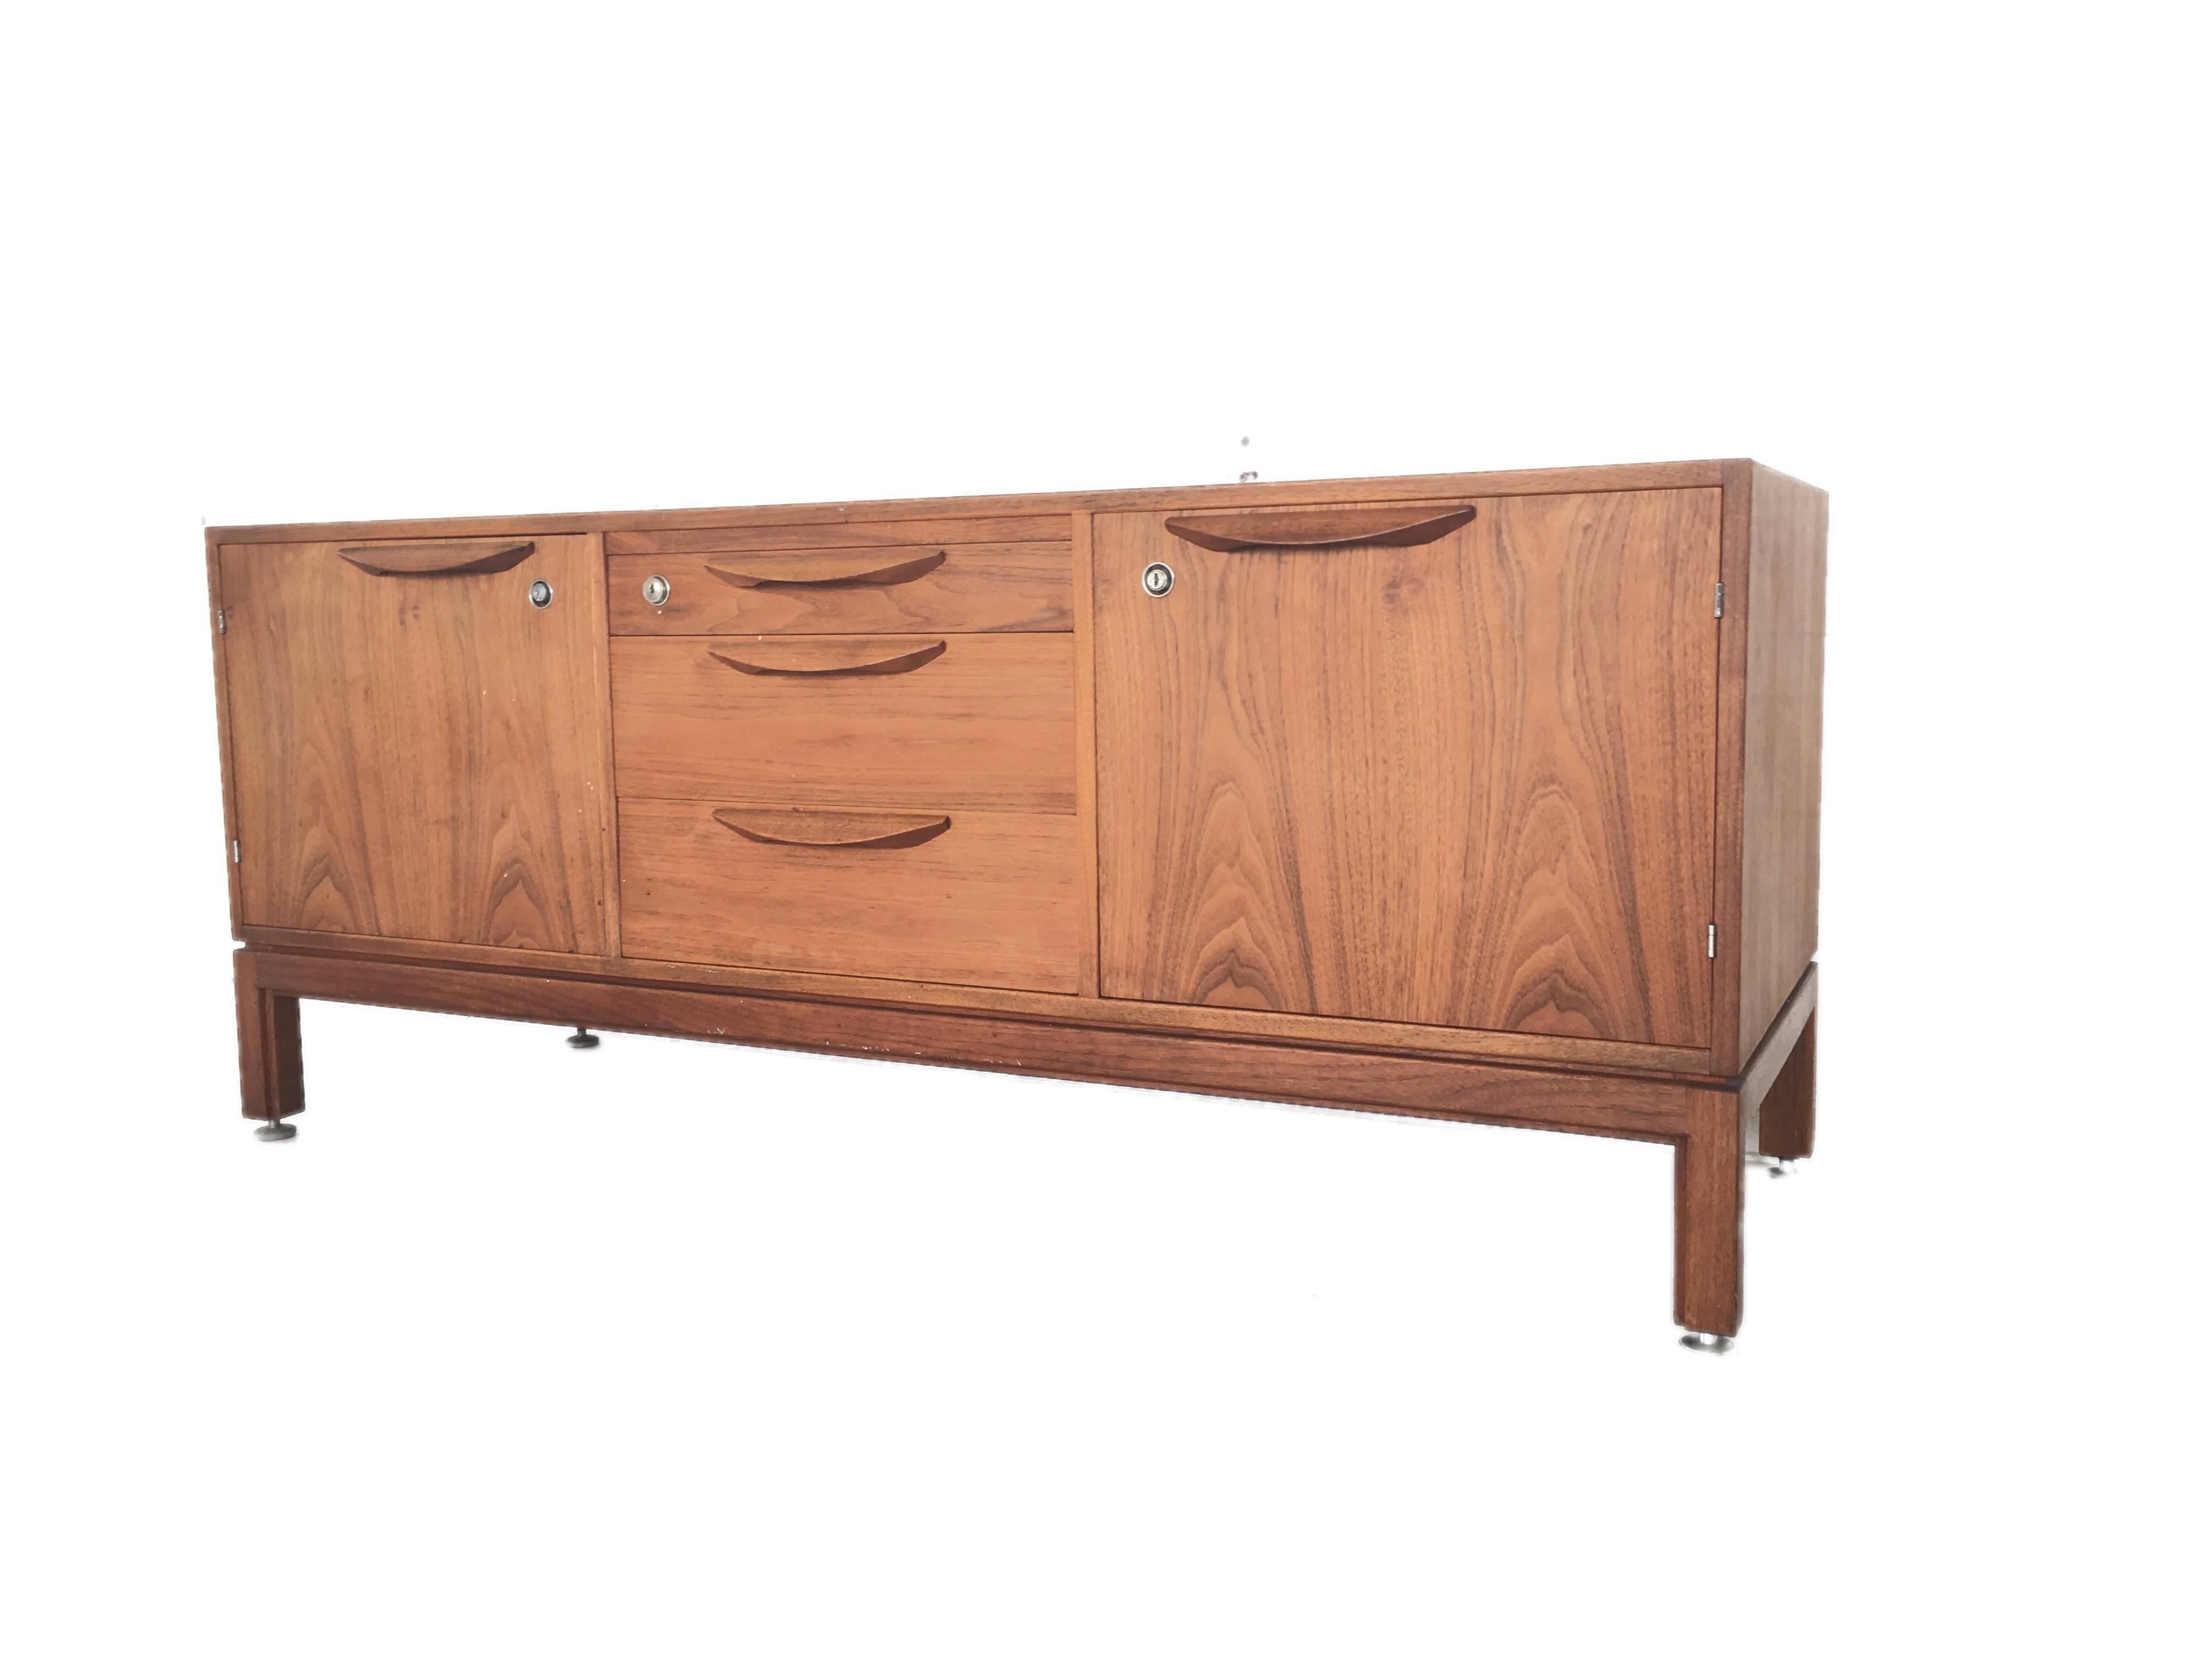 Very nice Danish rosewood sideboard from the 1970s. Special design bij Jens Risom from Denmark. Excellent for office or dining room purposes.